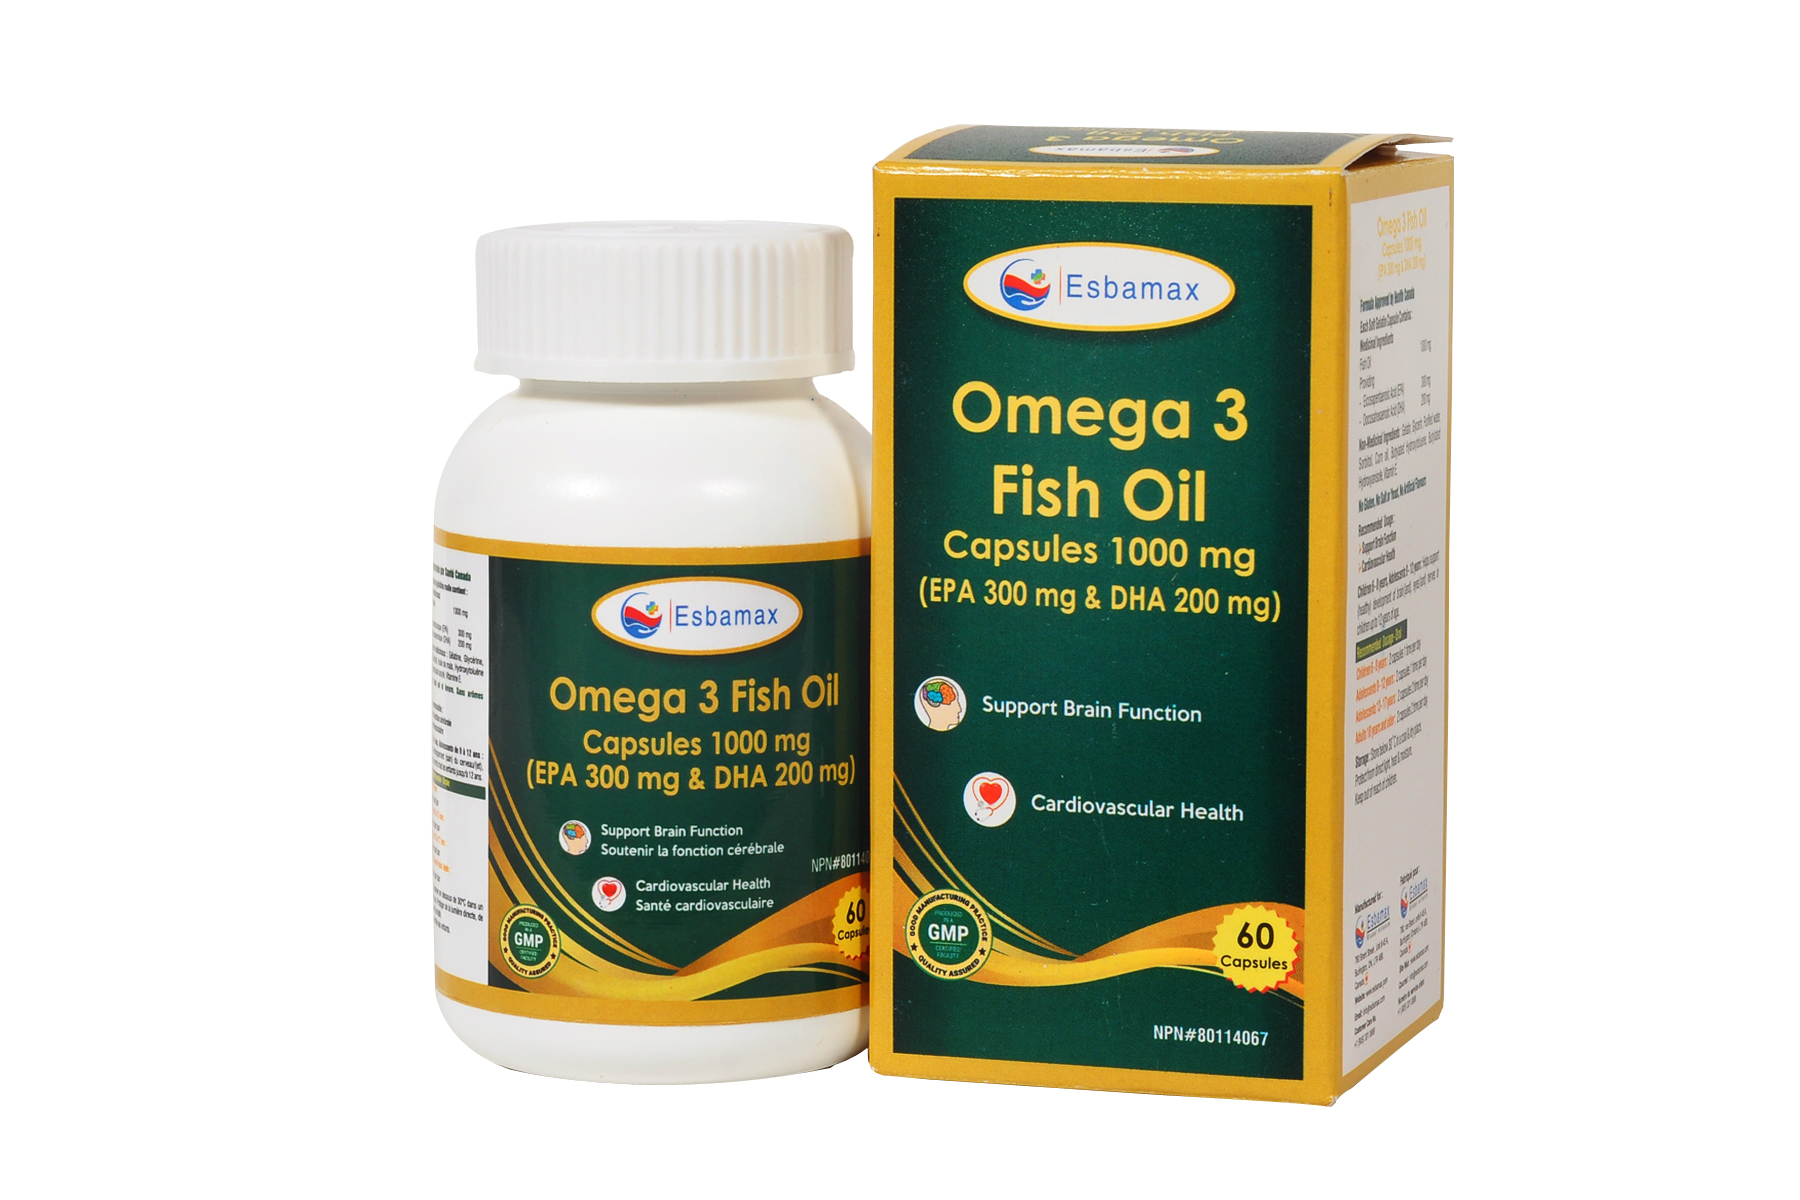 Omega 3 Fish Oil Cap. 1000 mg (EPA 300 mg & DHA 200 mg).............."FOR PRIVATE LABEL ONLY"